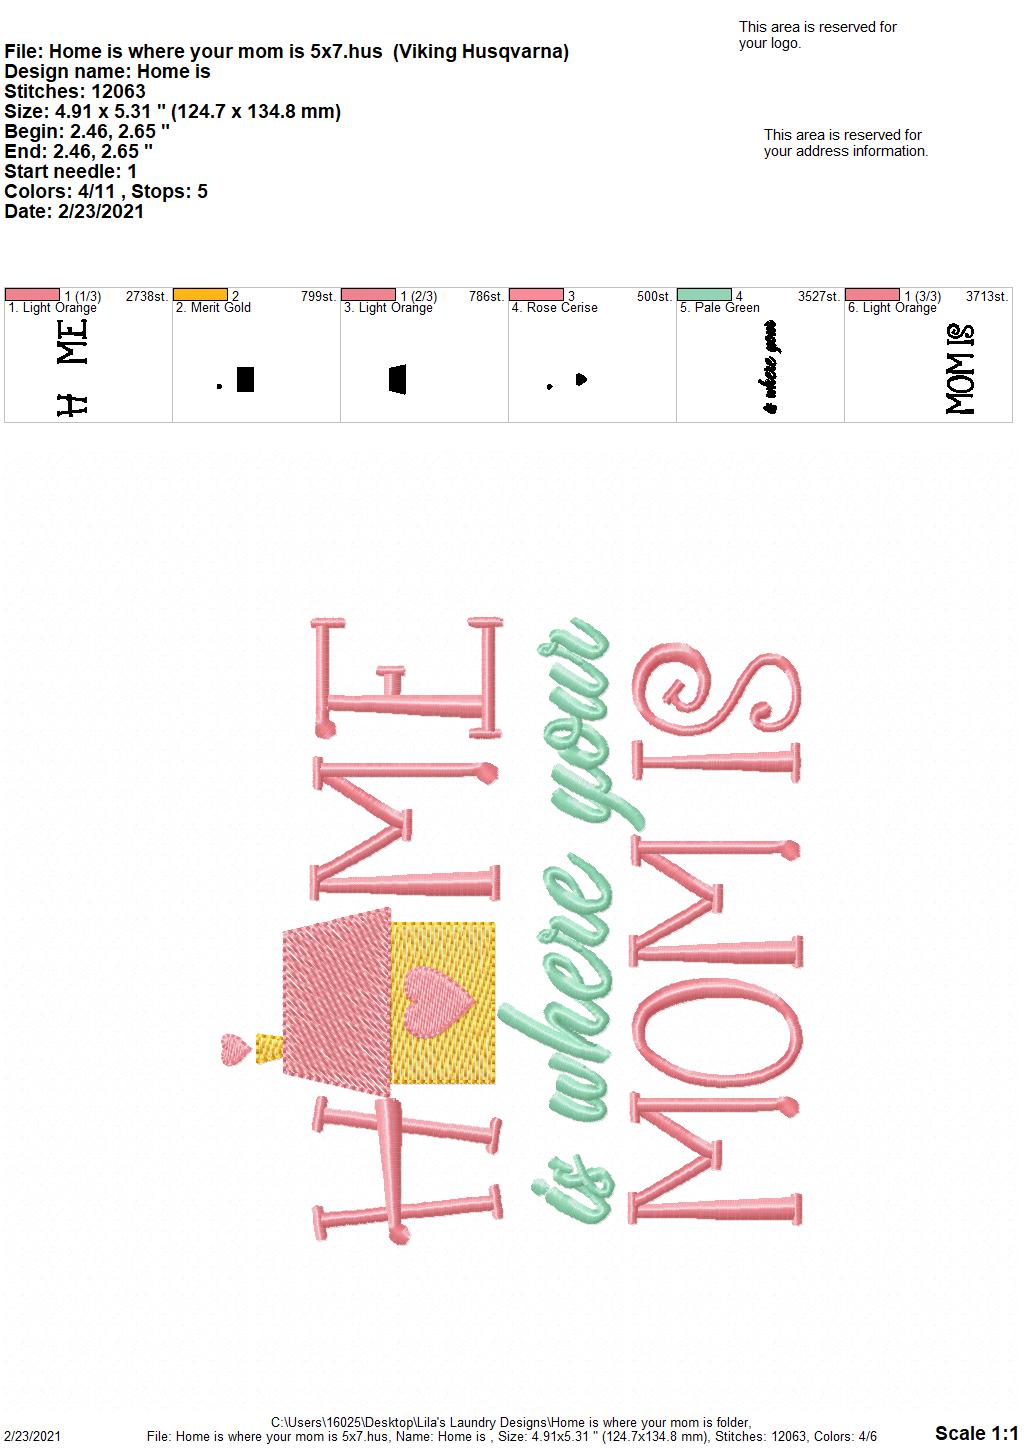 Home is Where your Mom is- 2 sizes- Digital Embroidery Design